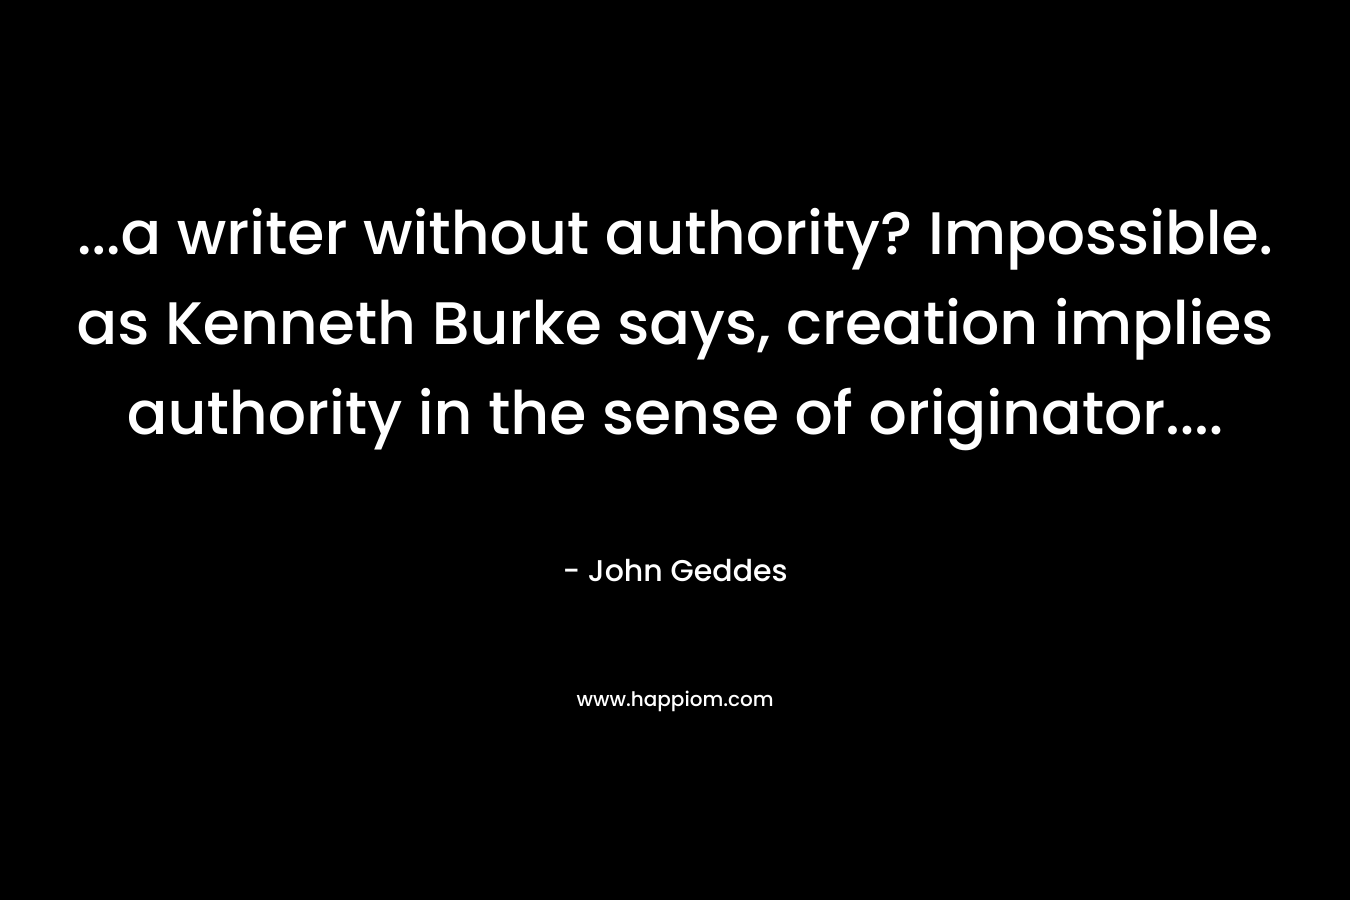 ...a writer without authority? Impossible. as Kenneth Burke says, creation implies authority in the sense of originator....